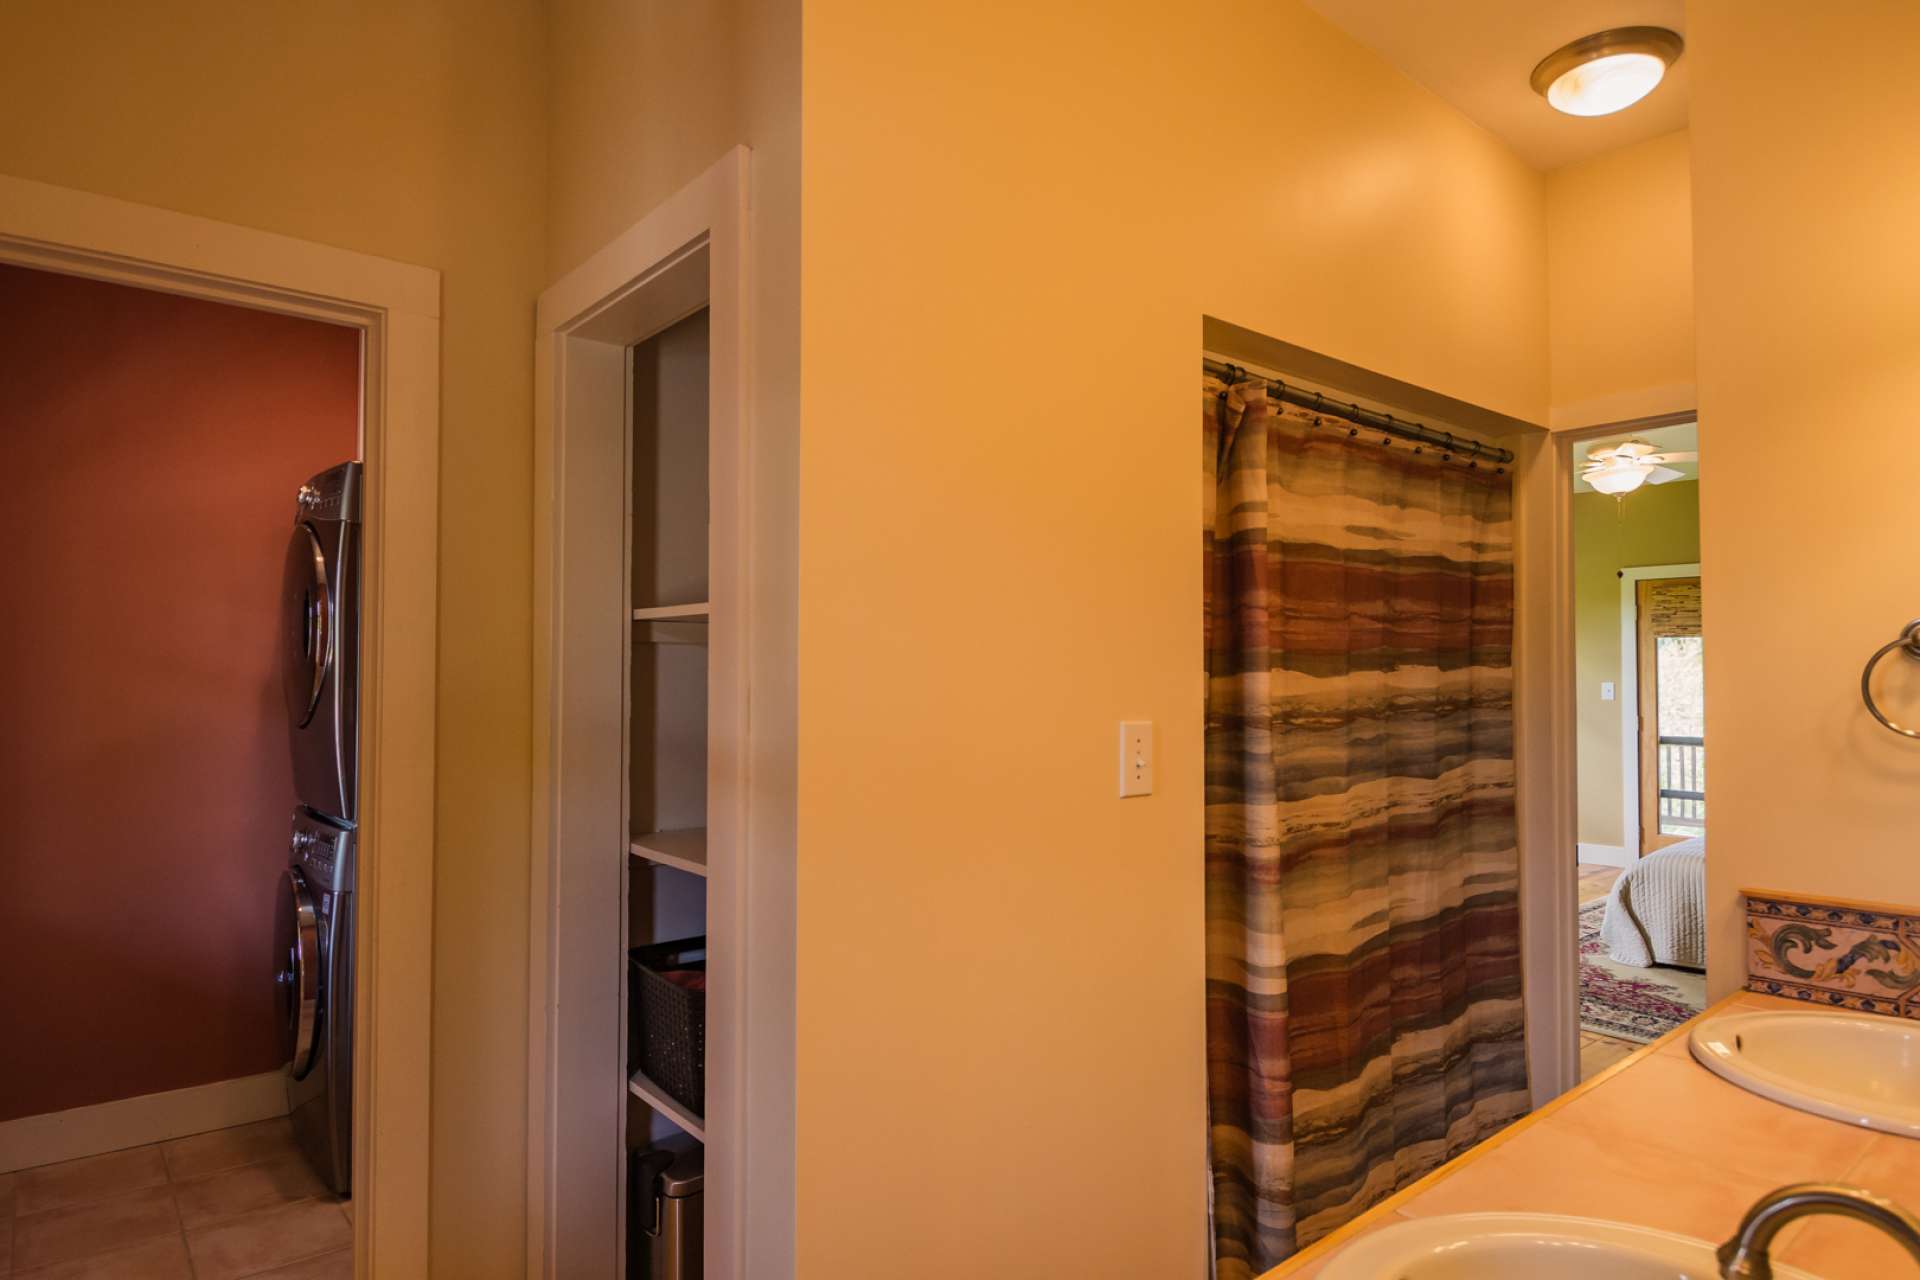 The large main level bath features a double vanity  and the laundry area completing the main level.